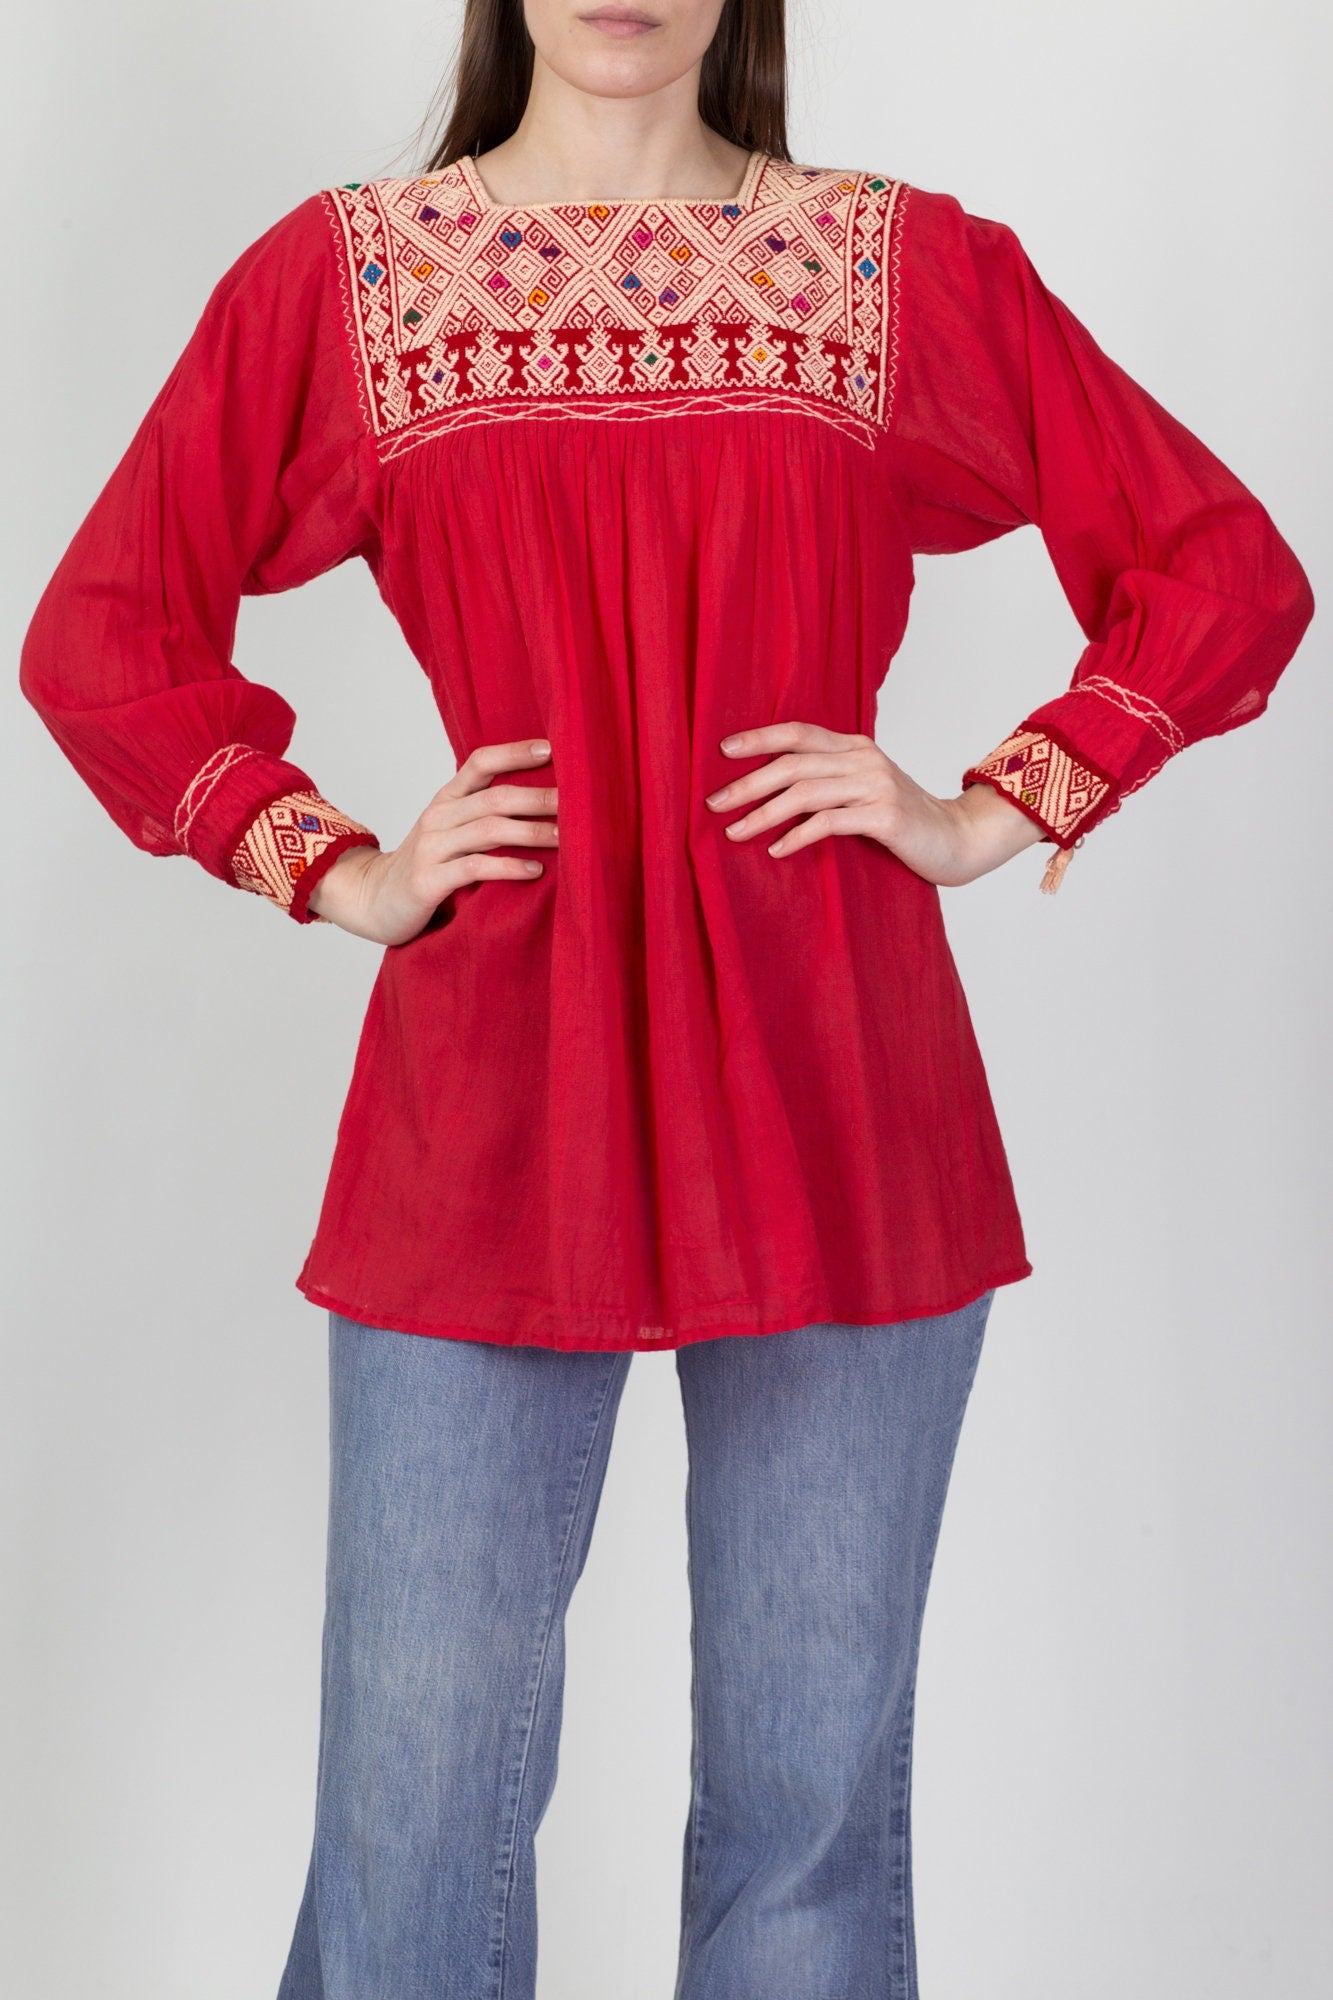 70s Embroidered Balkan Folk Blouse - Small to Medium 